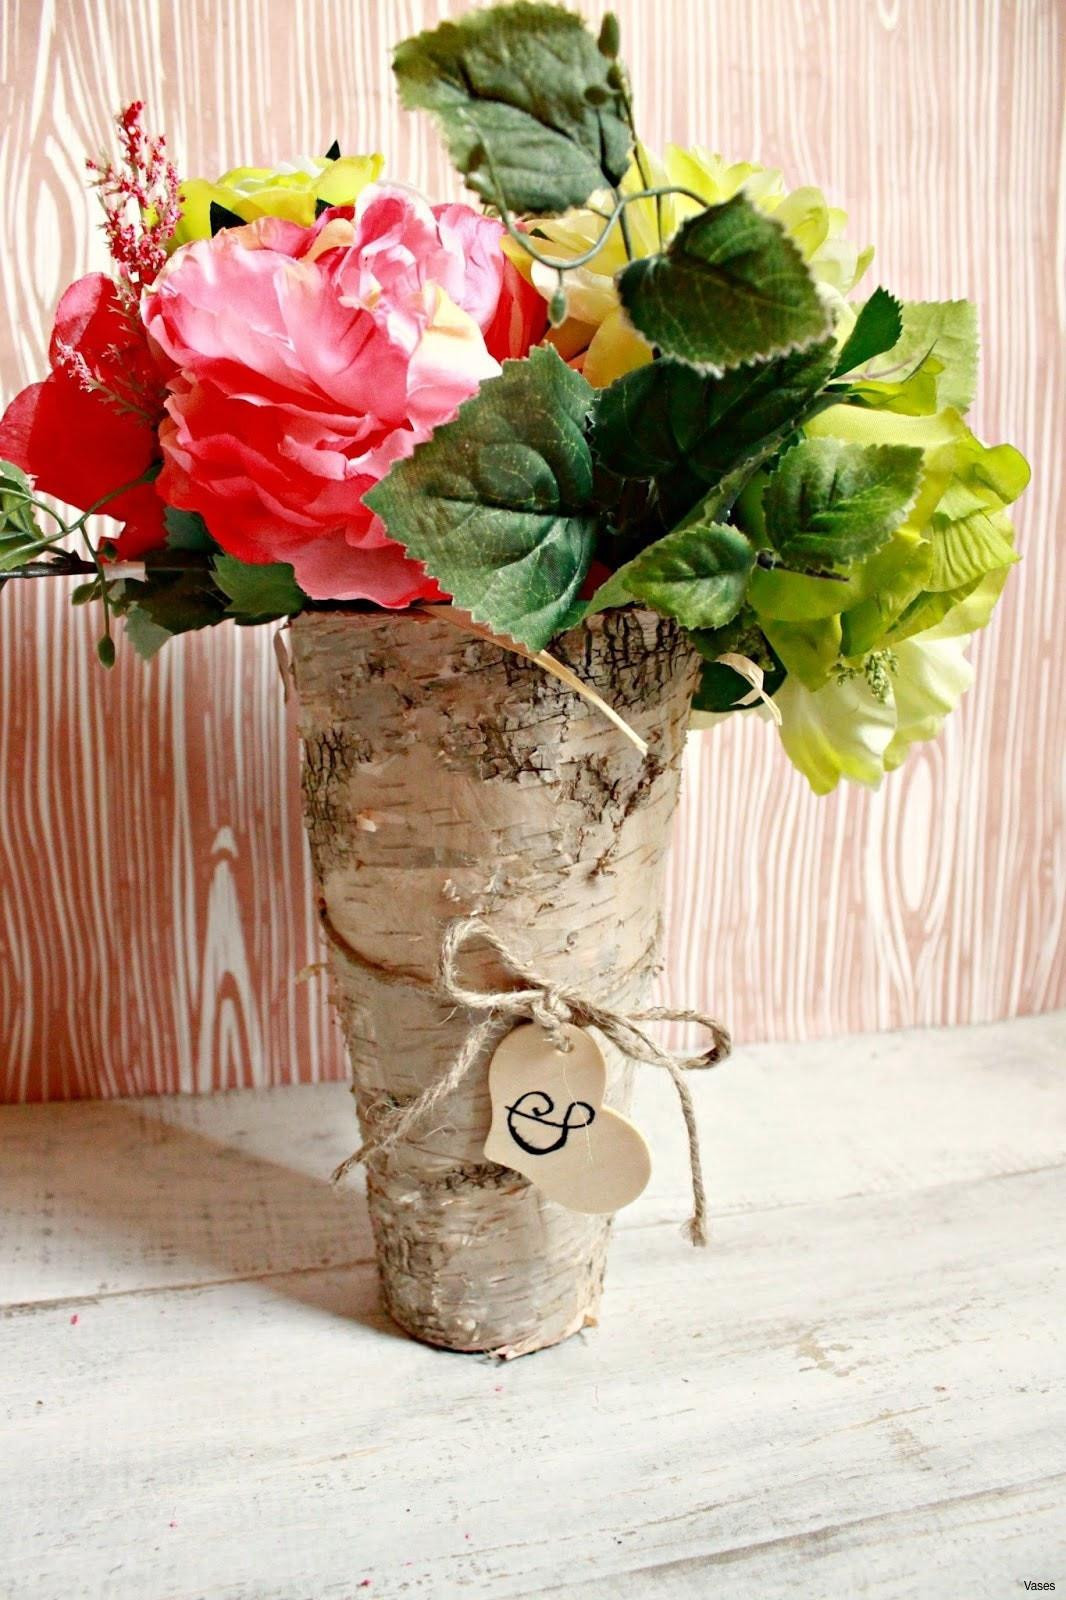 12 Popular Candy Bar Vases wholesale 2024 free download candy bar vases wholesale of diy wedding ideas on a budget fresh flowers and decorations for within diy wedding ideas on a budget fresh flowers and decorations for weddings h vases diy wood